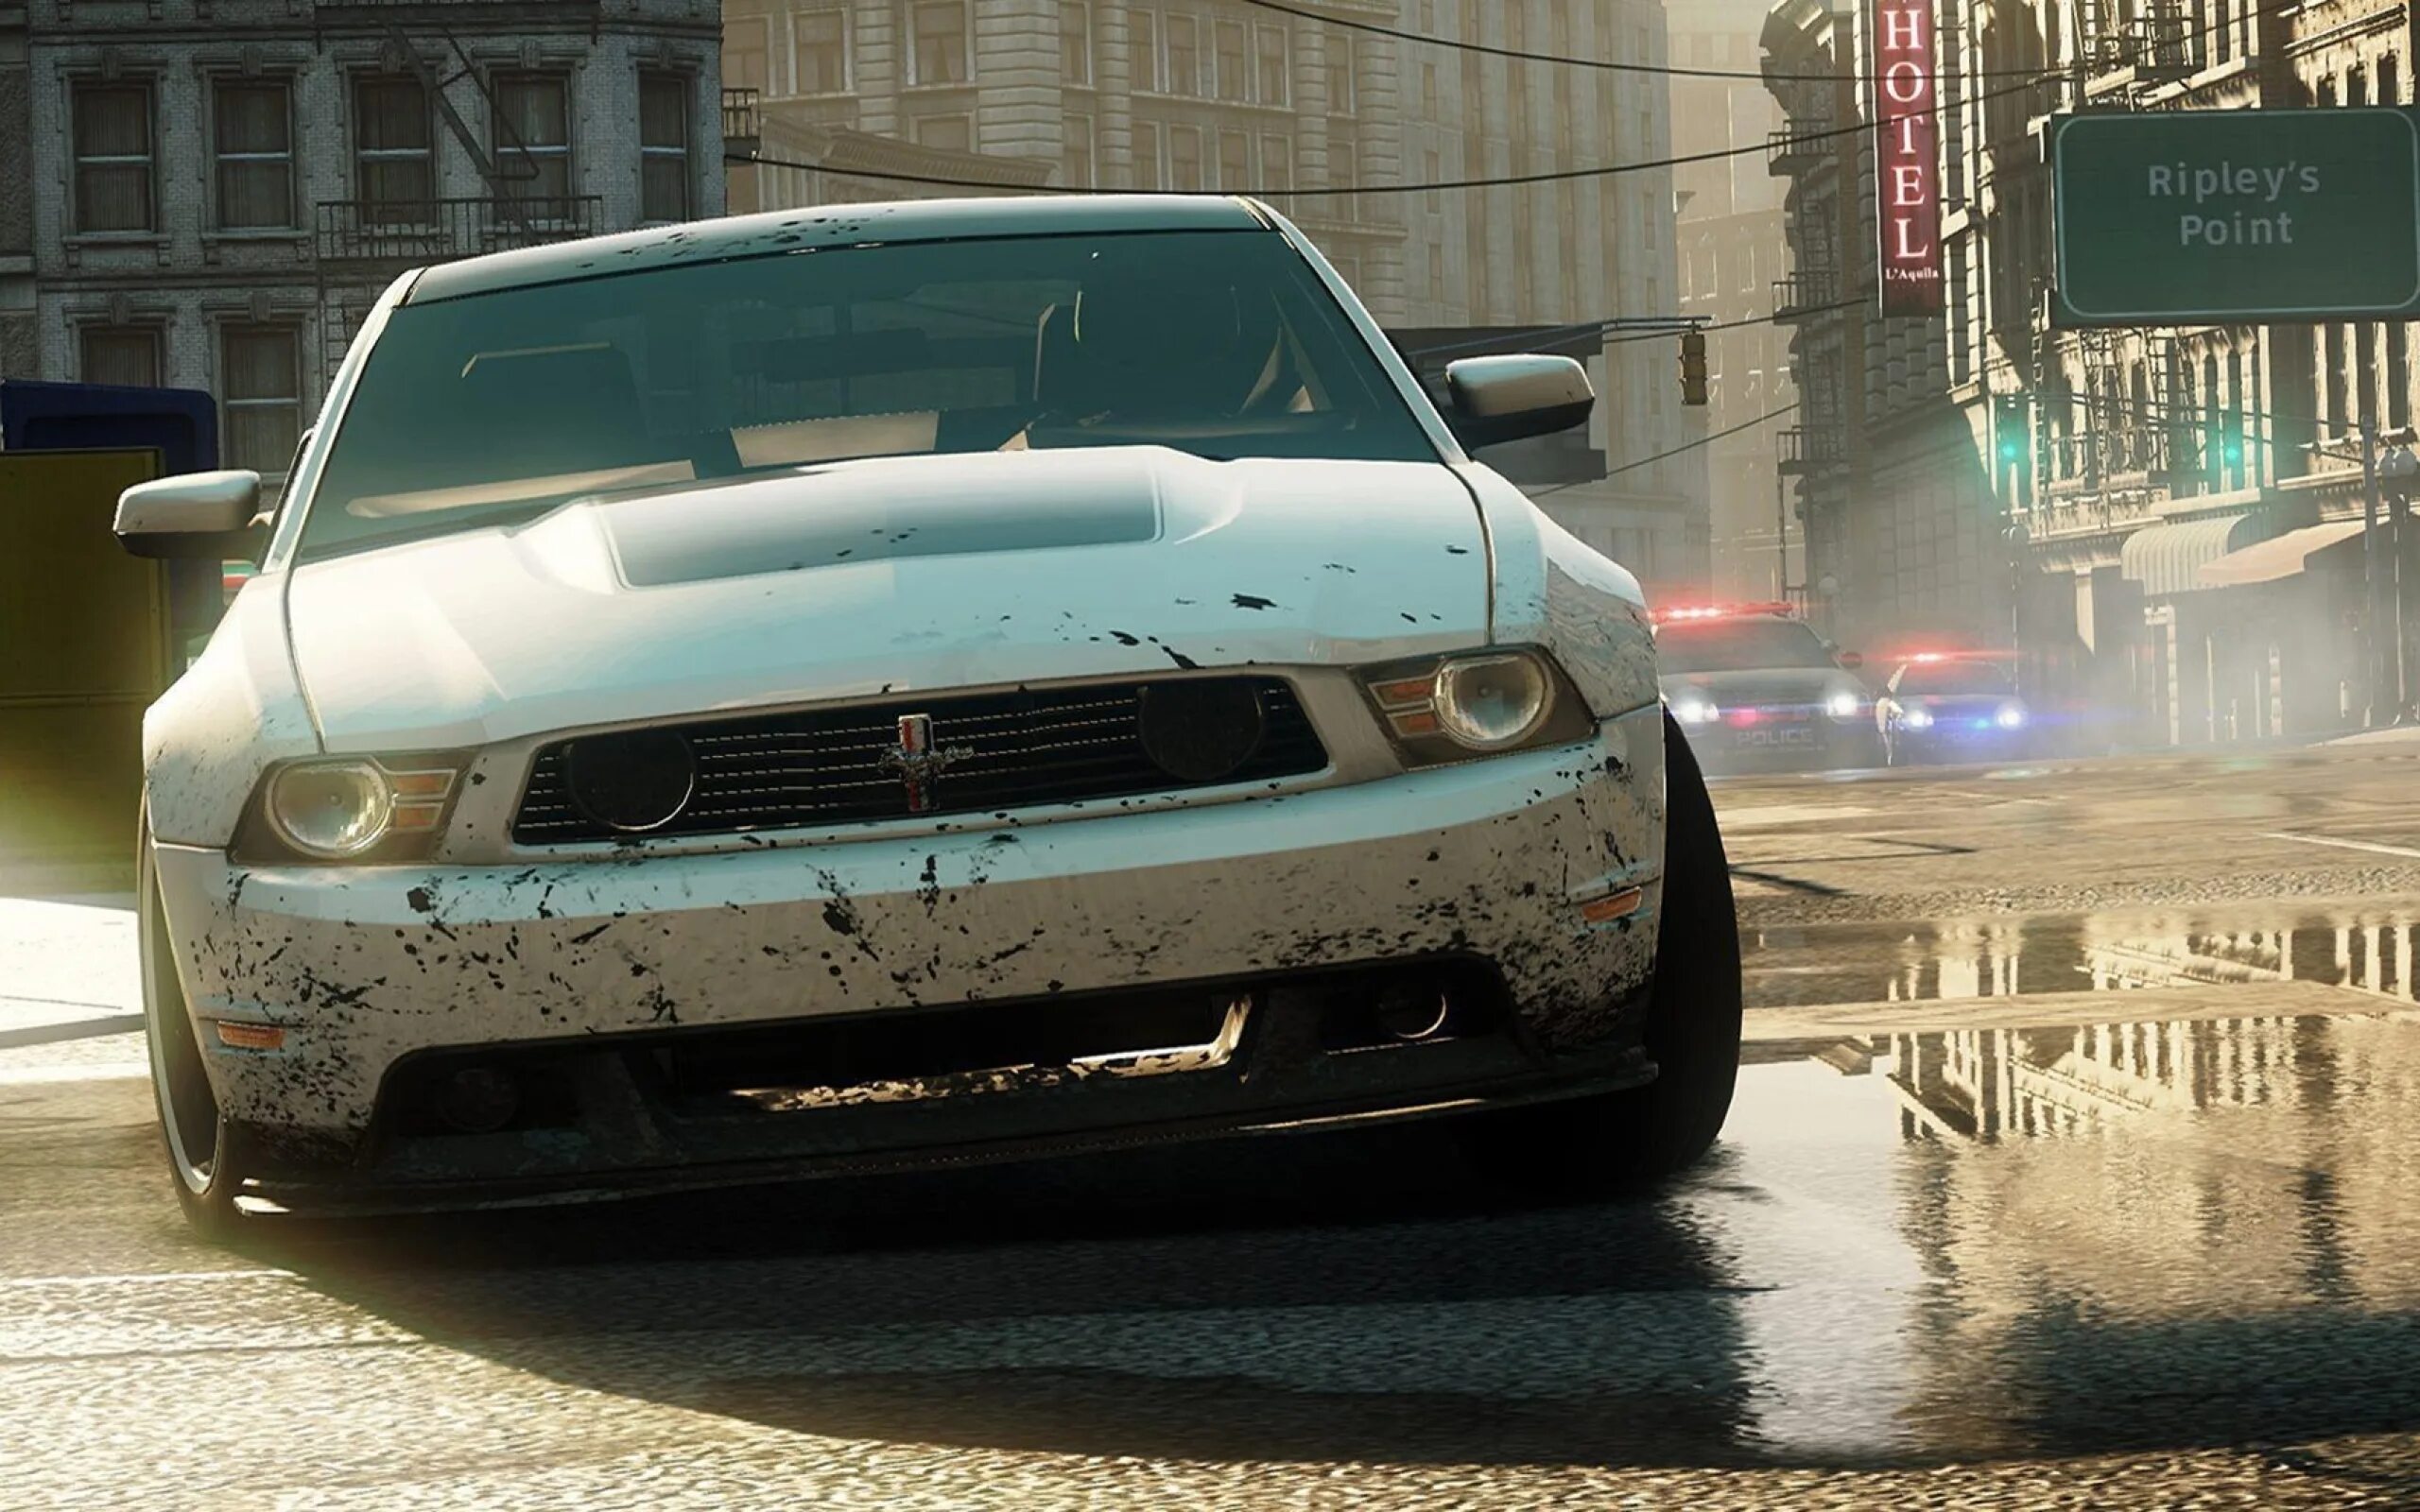 Нефорд спид мост. Need for Speed most wanted 2012. Нфс most wanted 2012. Гонки NFS most wanted 2012. Нфс МВ 2012 Форд Мустанг.